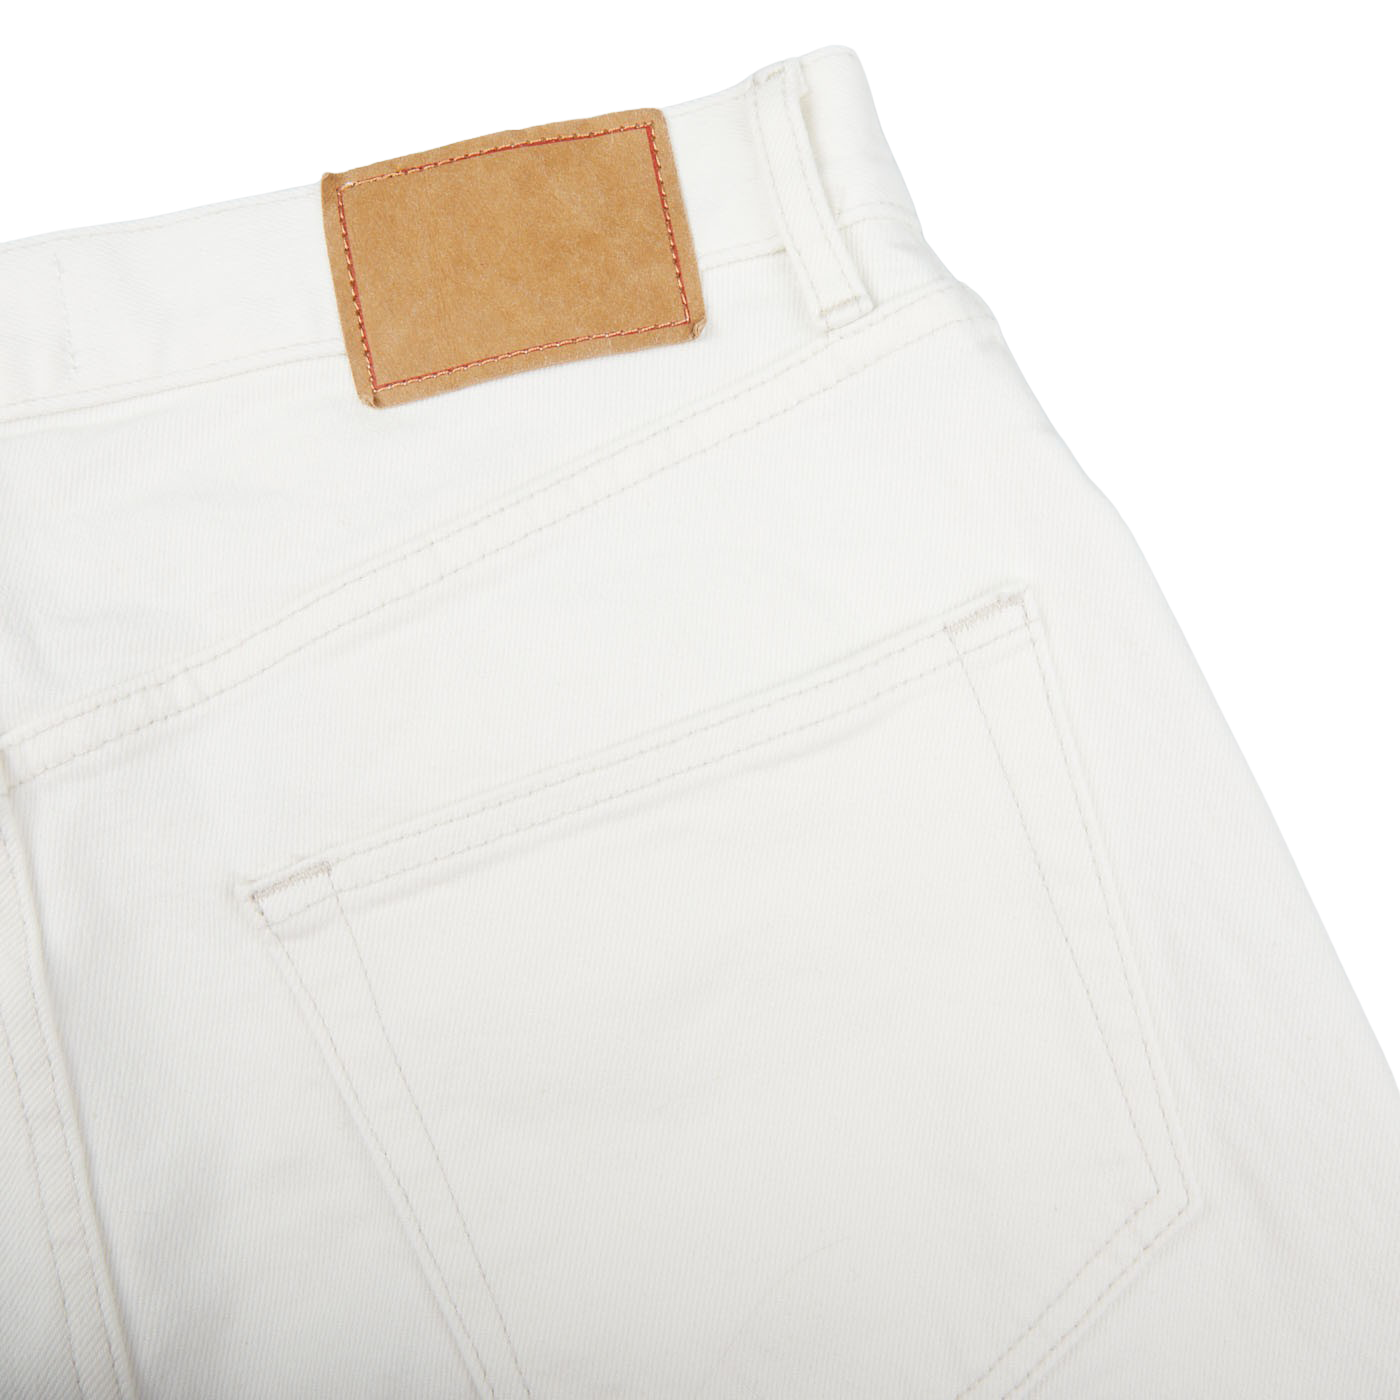 Jeanerica Natural White Cotton TM005 Jeans Pocket